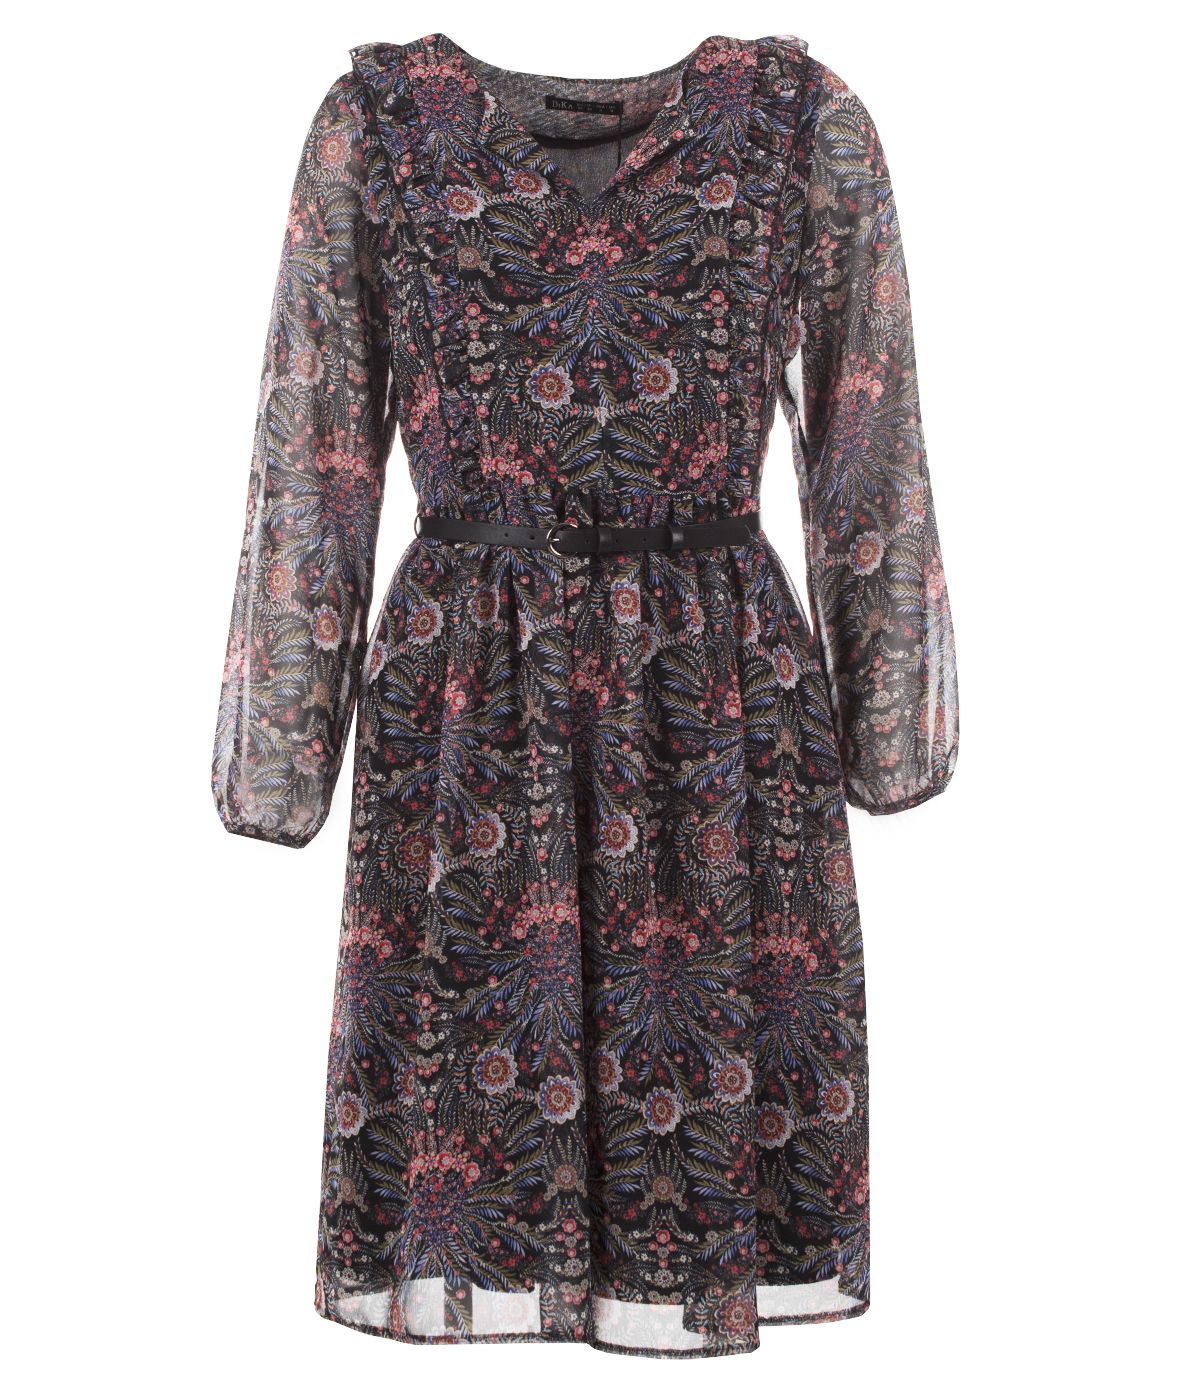 Chiffon dress with long sleeves, emphasized waist, with paisley print  2